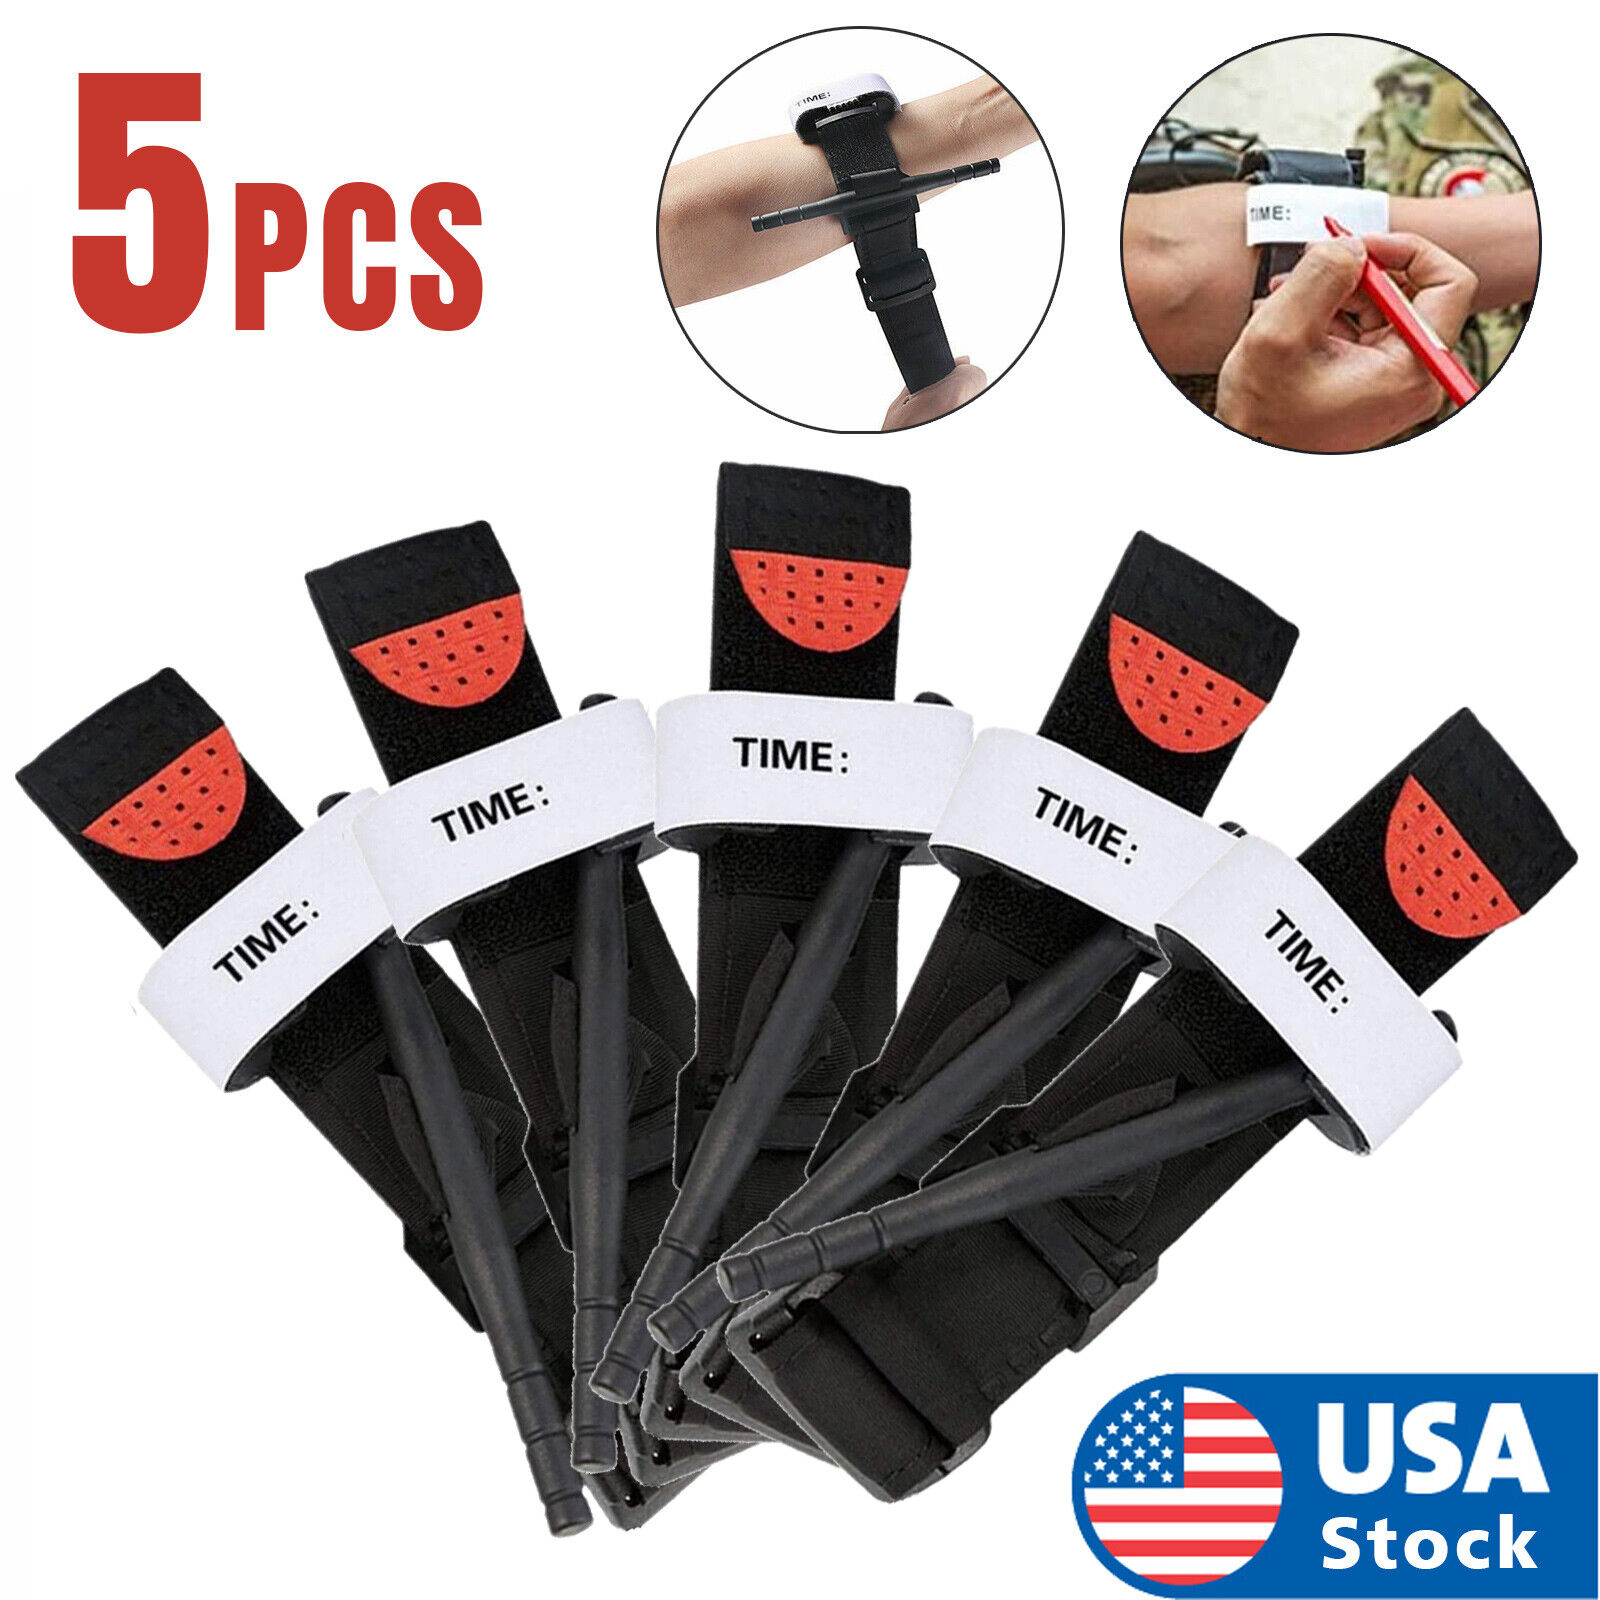 5 pcs Tourniquet Rapid One Hand Application Emergency Outdoor First Aid Kit